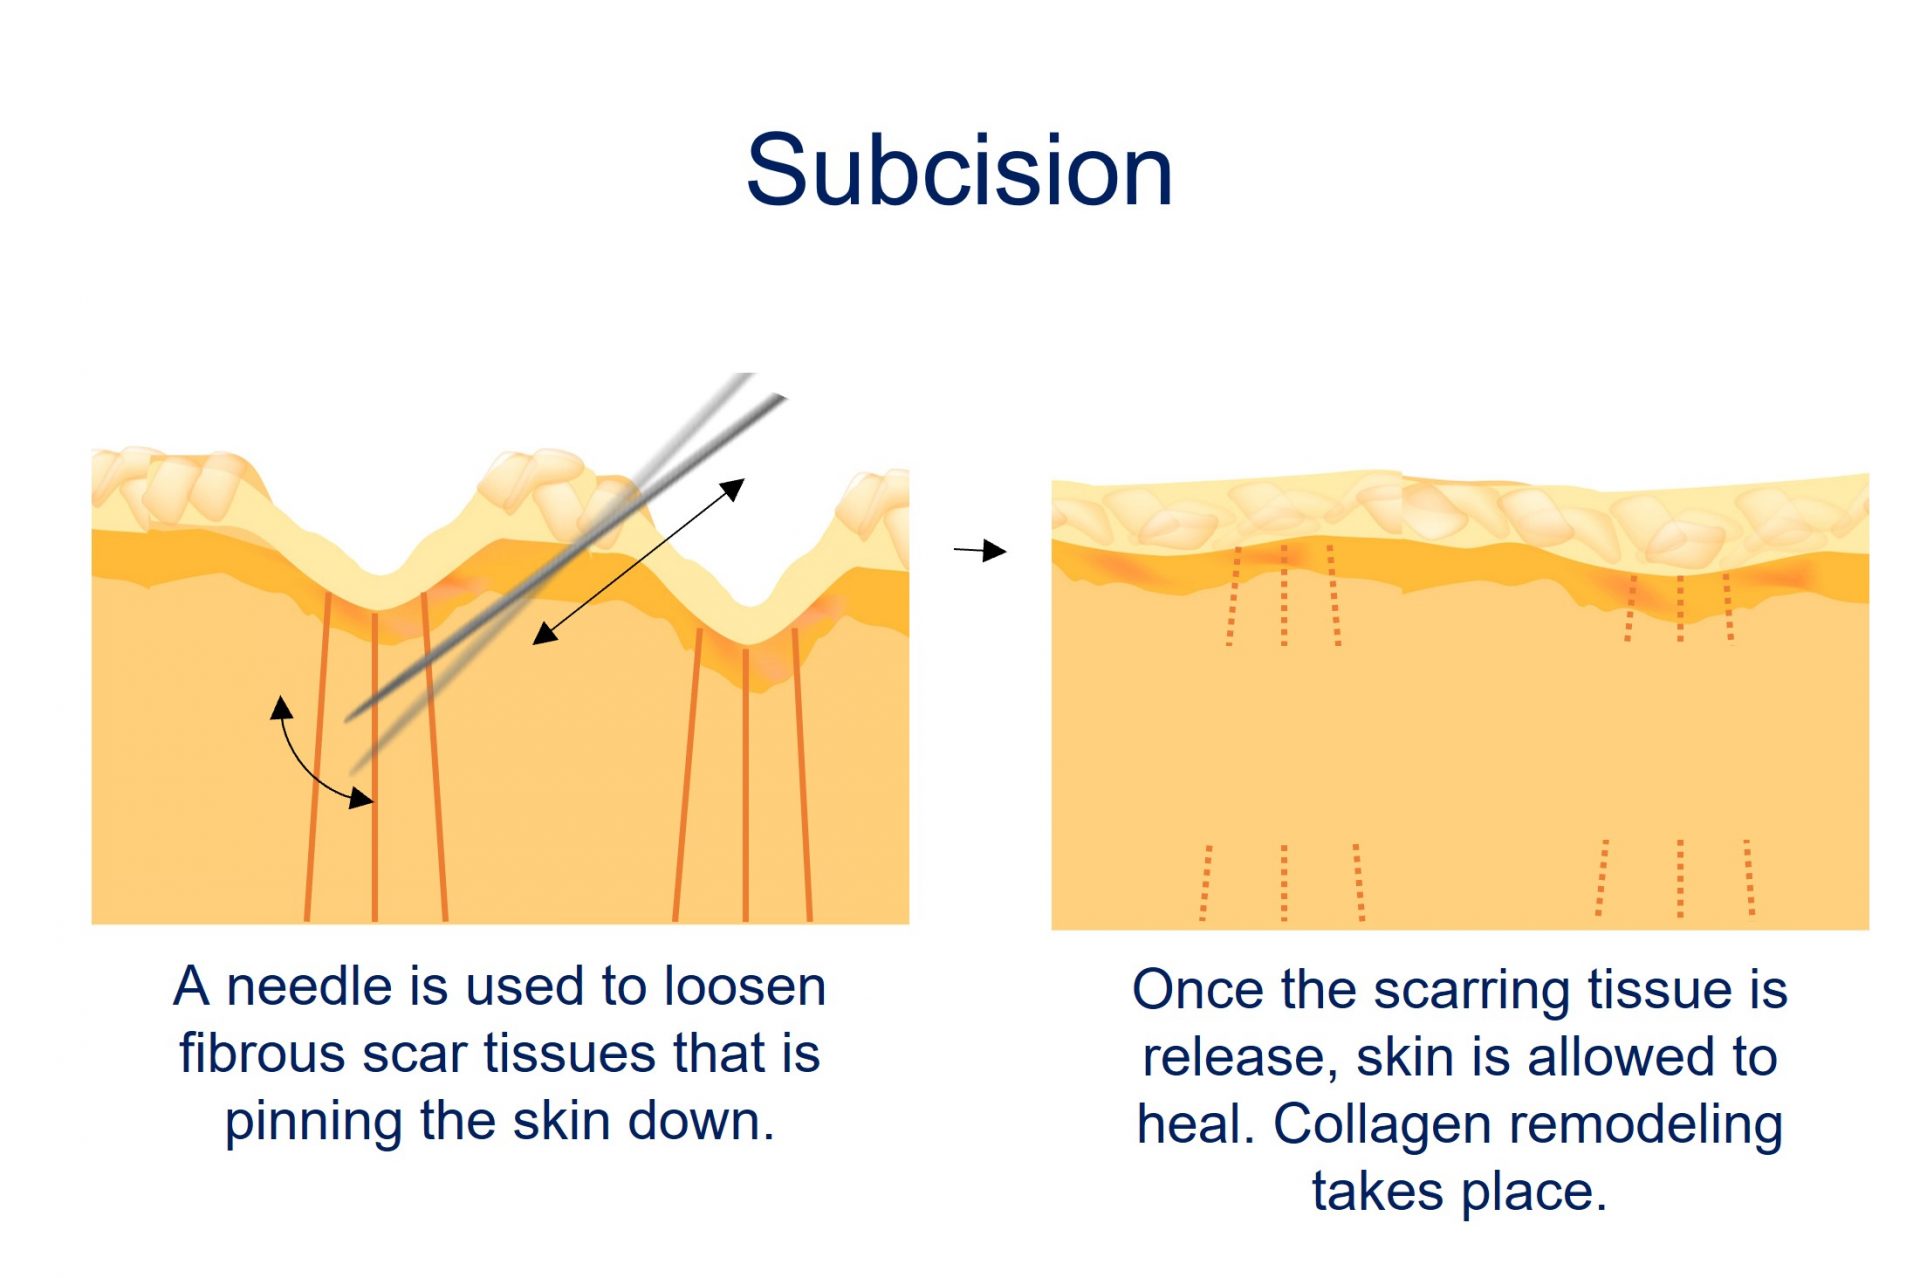 acne scar subcision - how it works